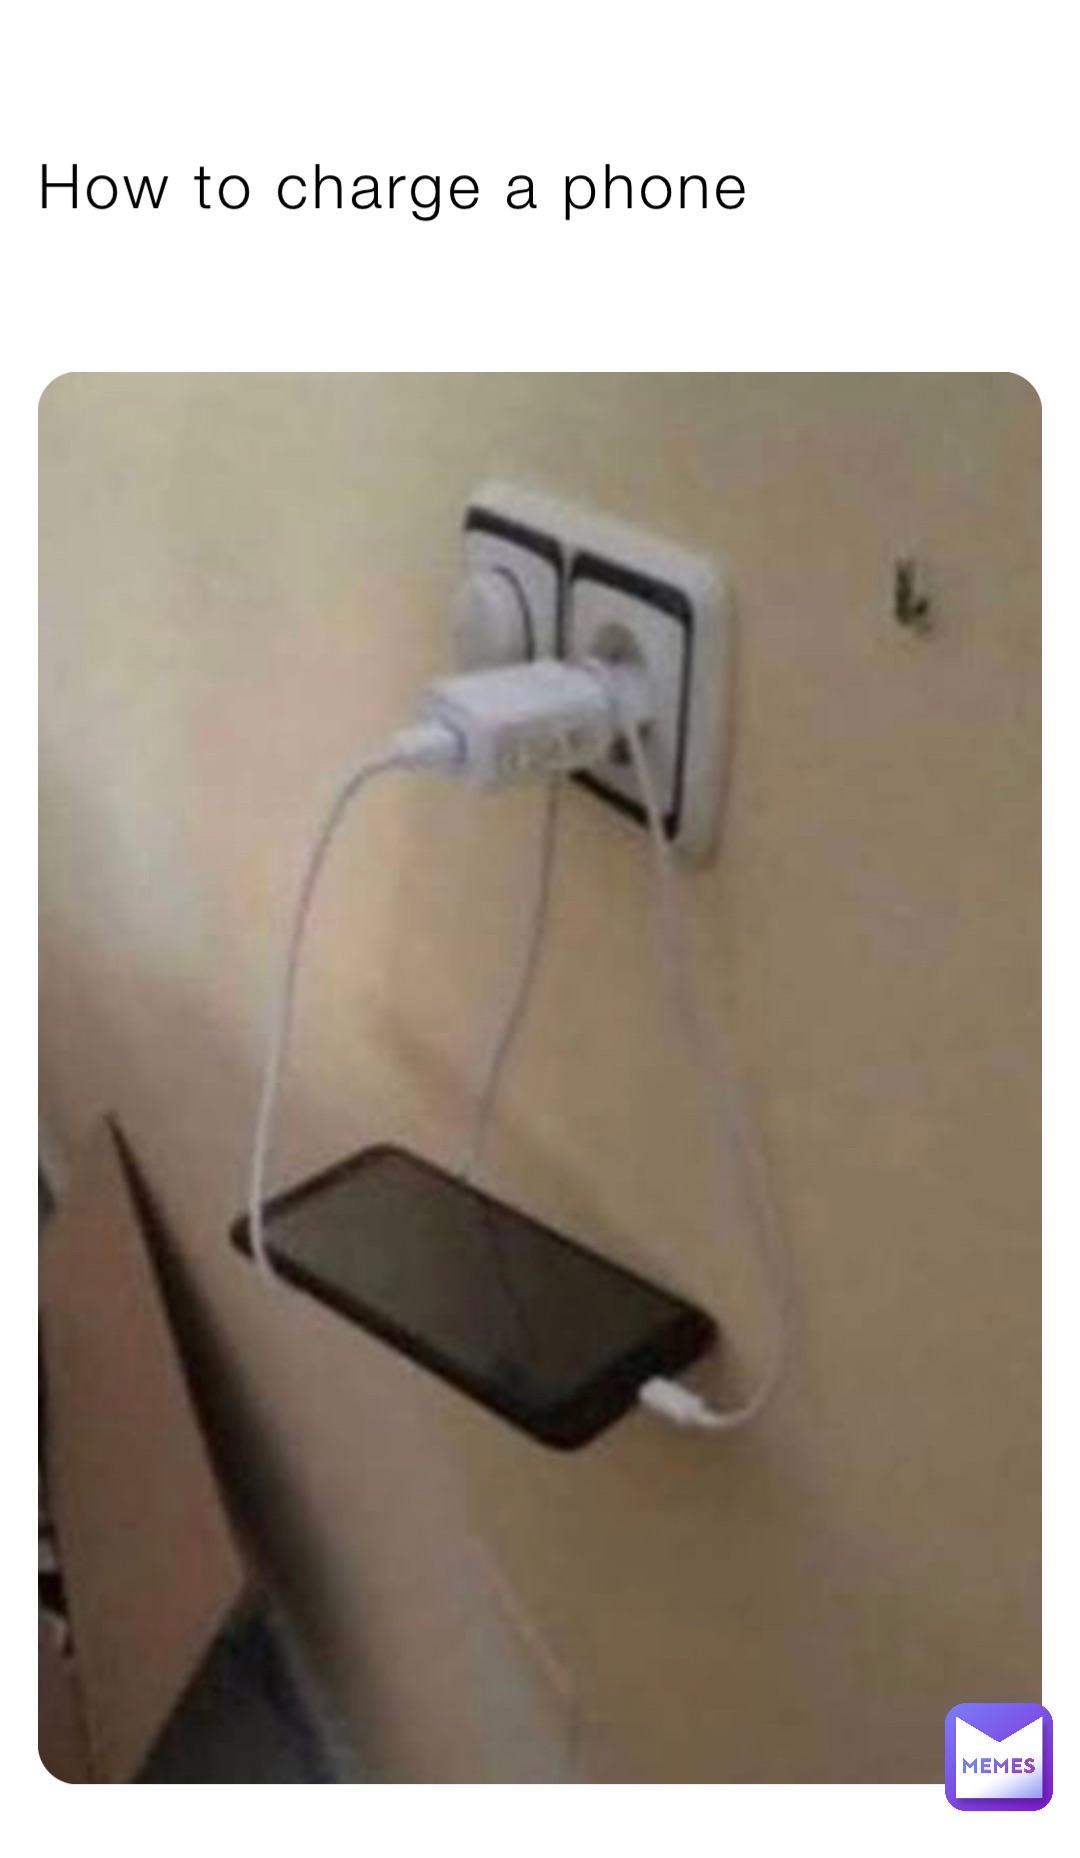 How to charge a phone